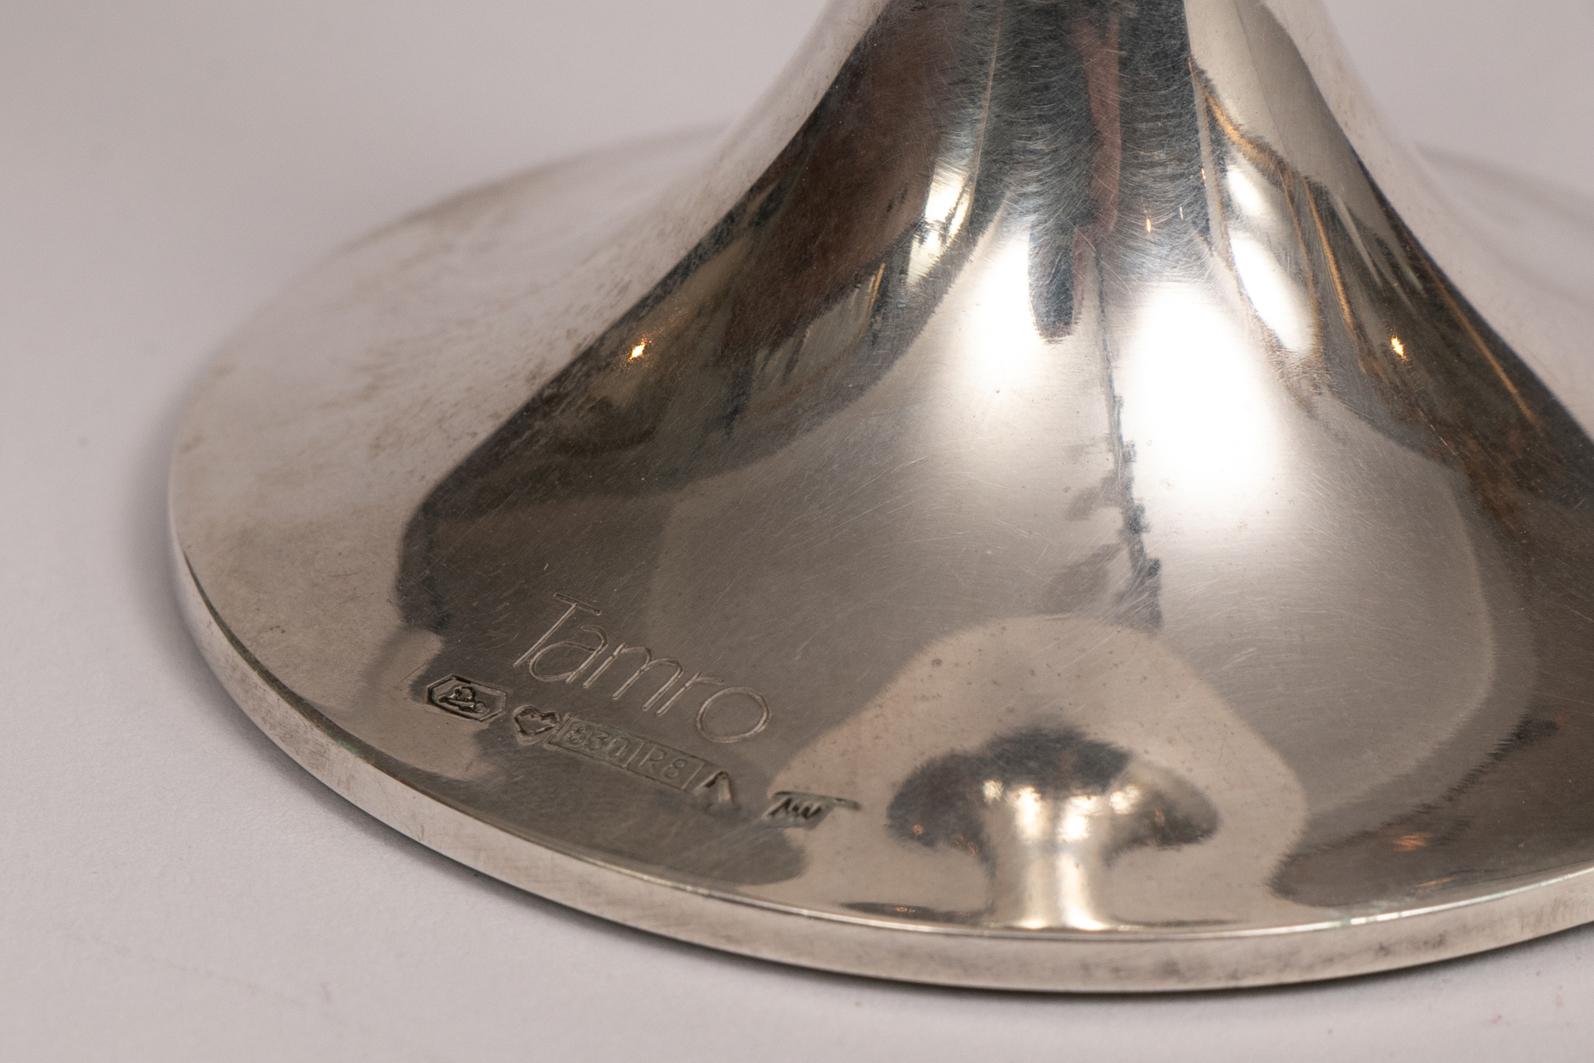 A Tapio Wirkkala sterling silver trumpet candlestick designed in 1963 and manufactured by Kultakeskus in 1994, Hämeenlinna, Finland. Excellent condition, has small graving on the base.